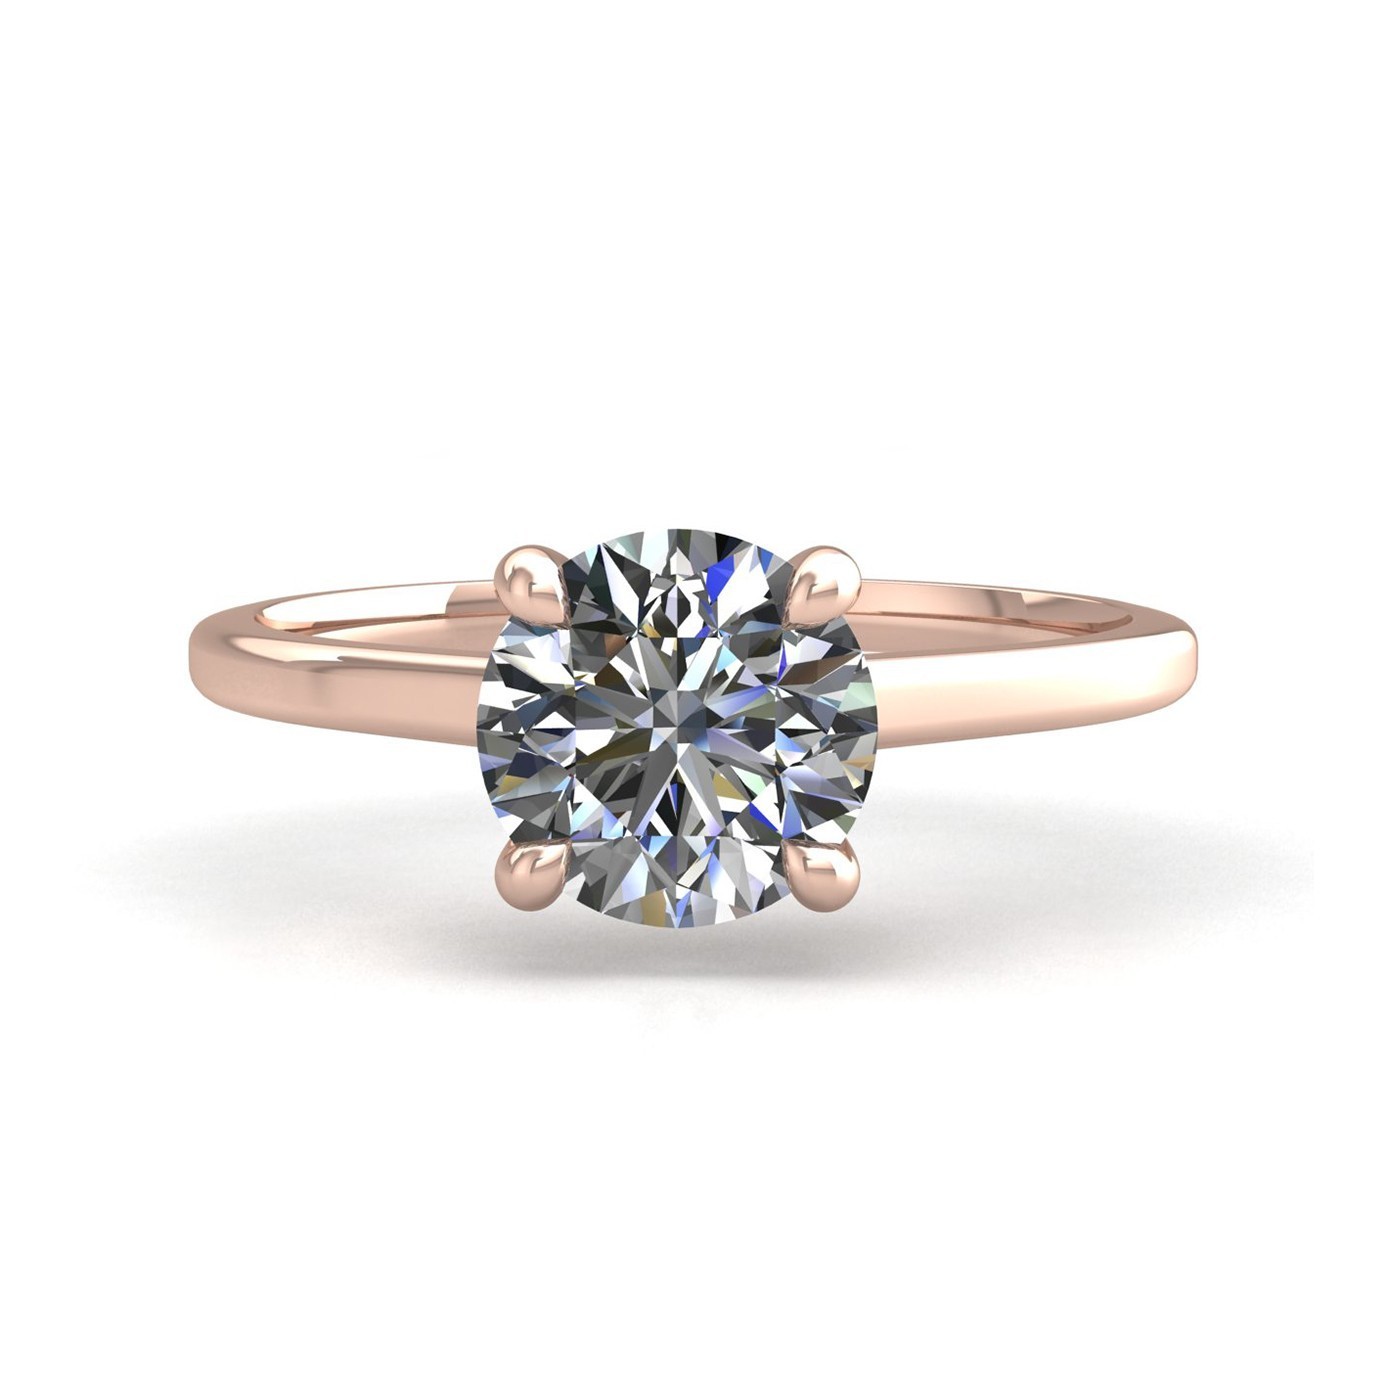 18k rose gold 1.0ct 4 prongs solitaire round cut diamond engagement ring with whisper thin band